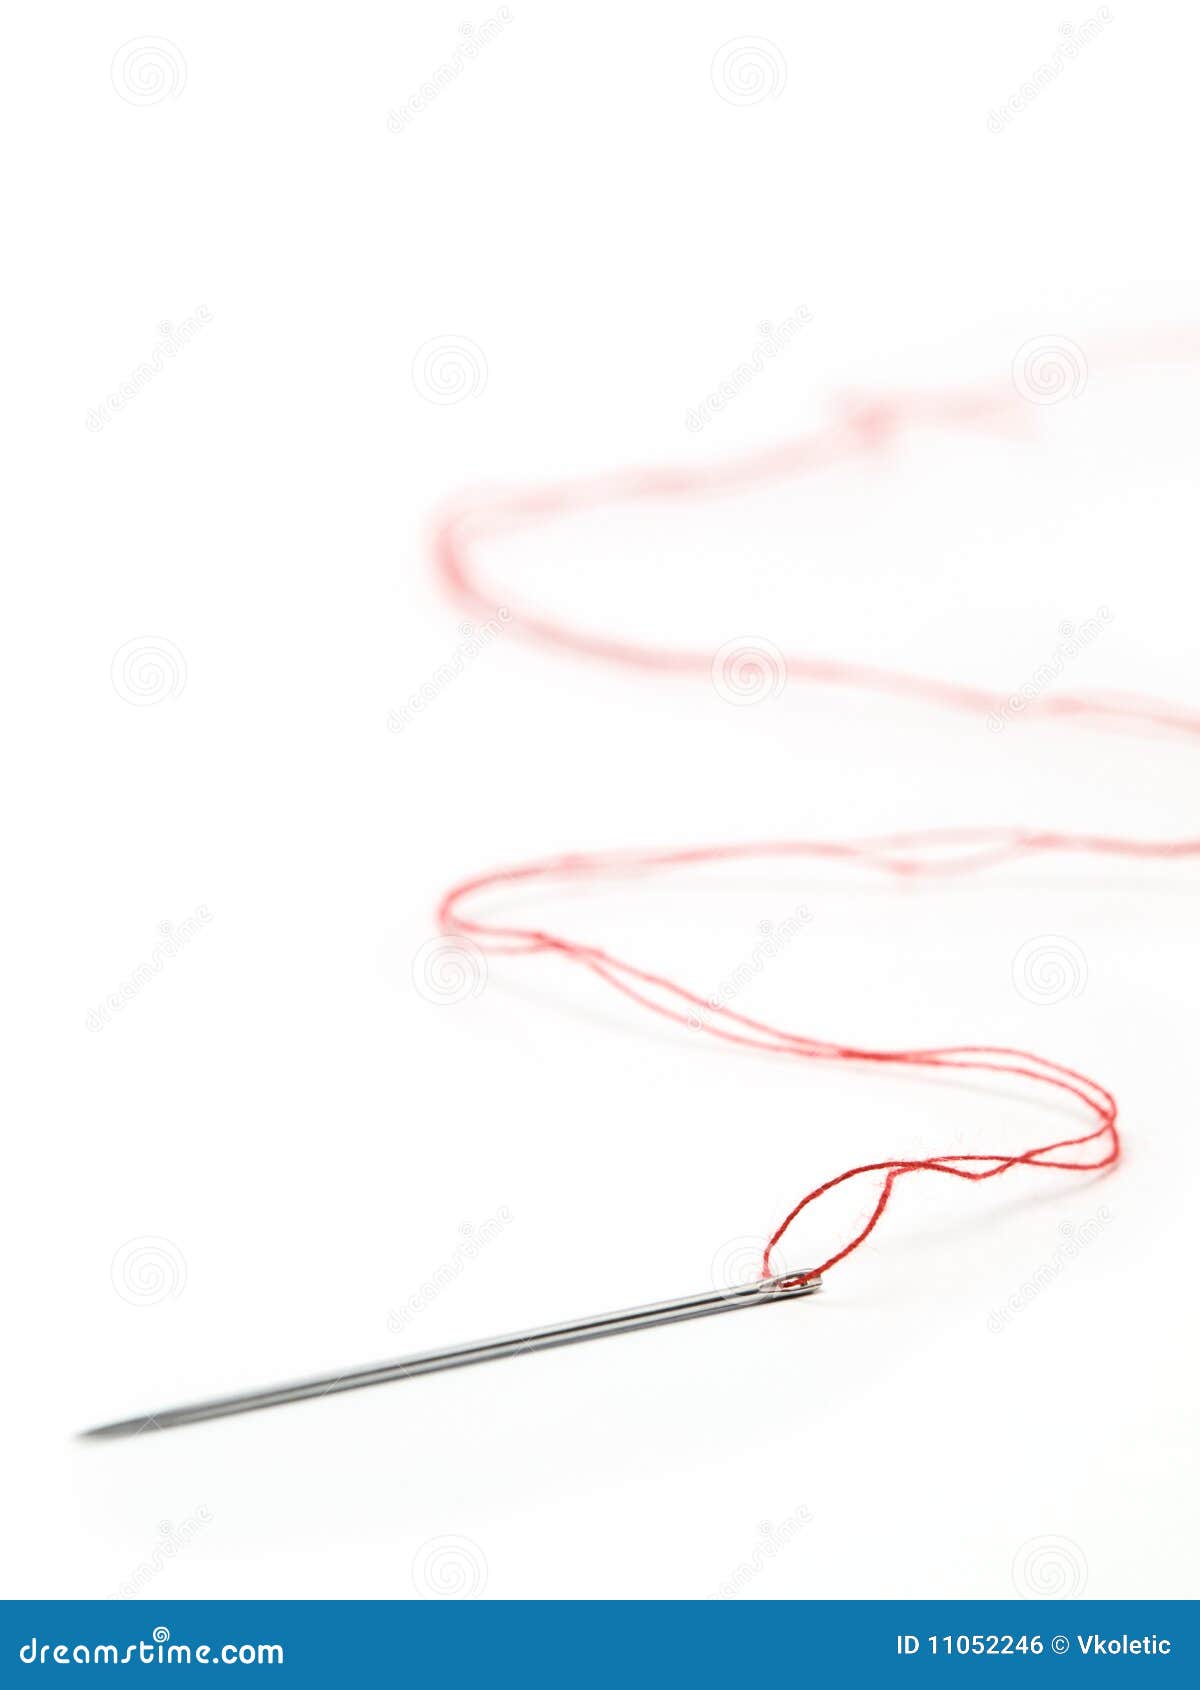 Needle with the red thread stock photo. Image of color - 11052246